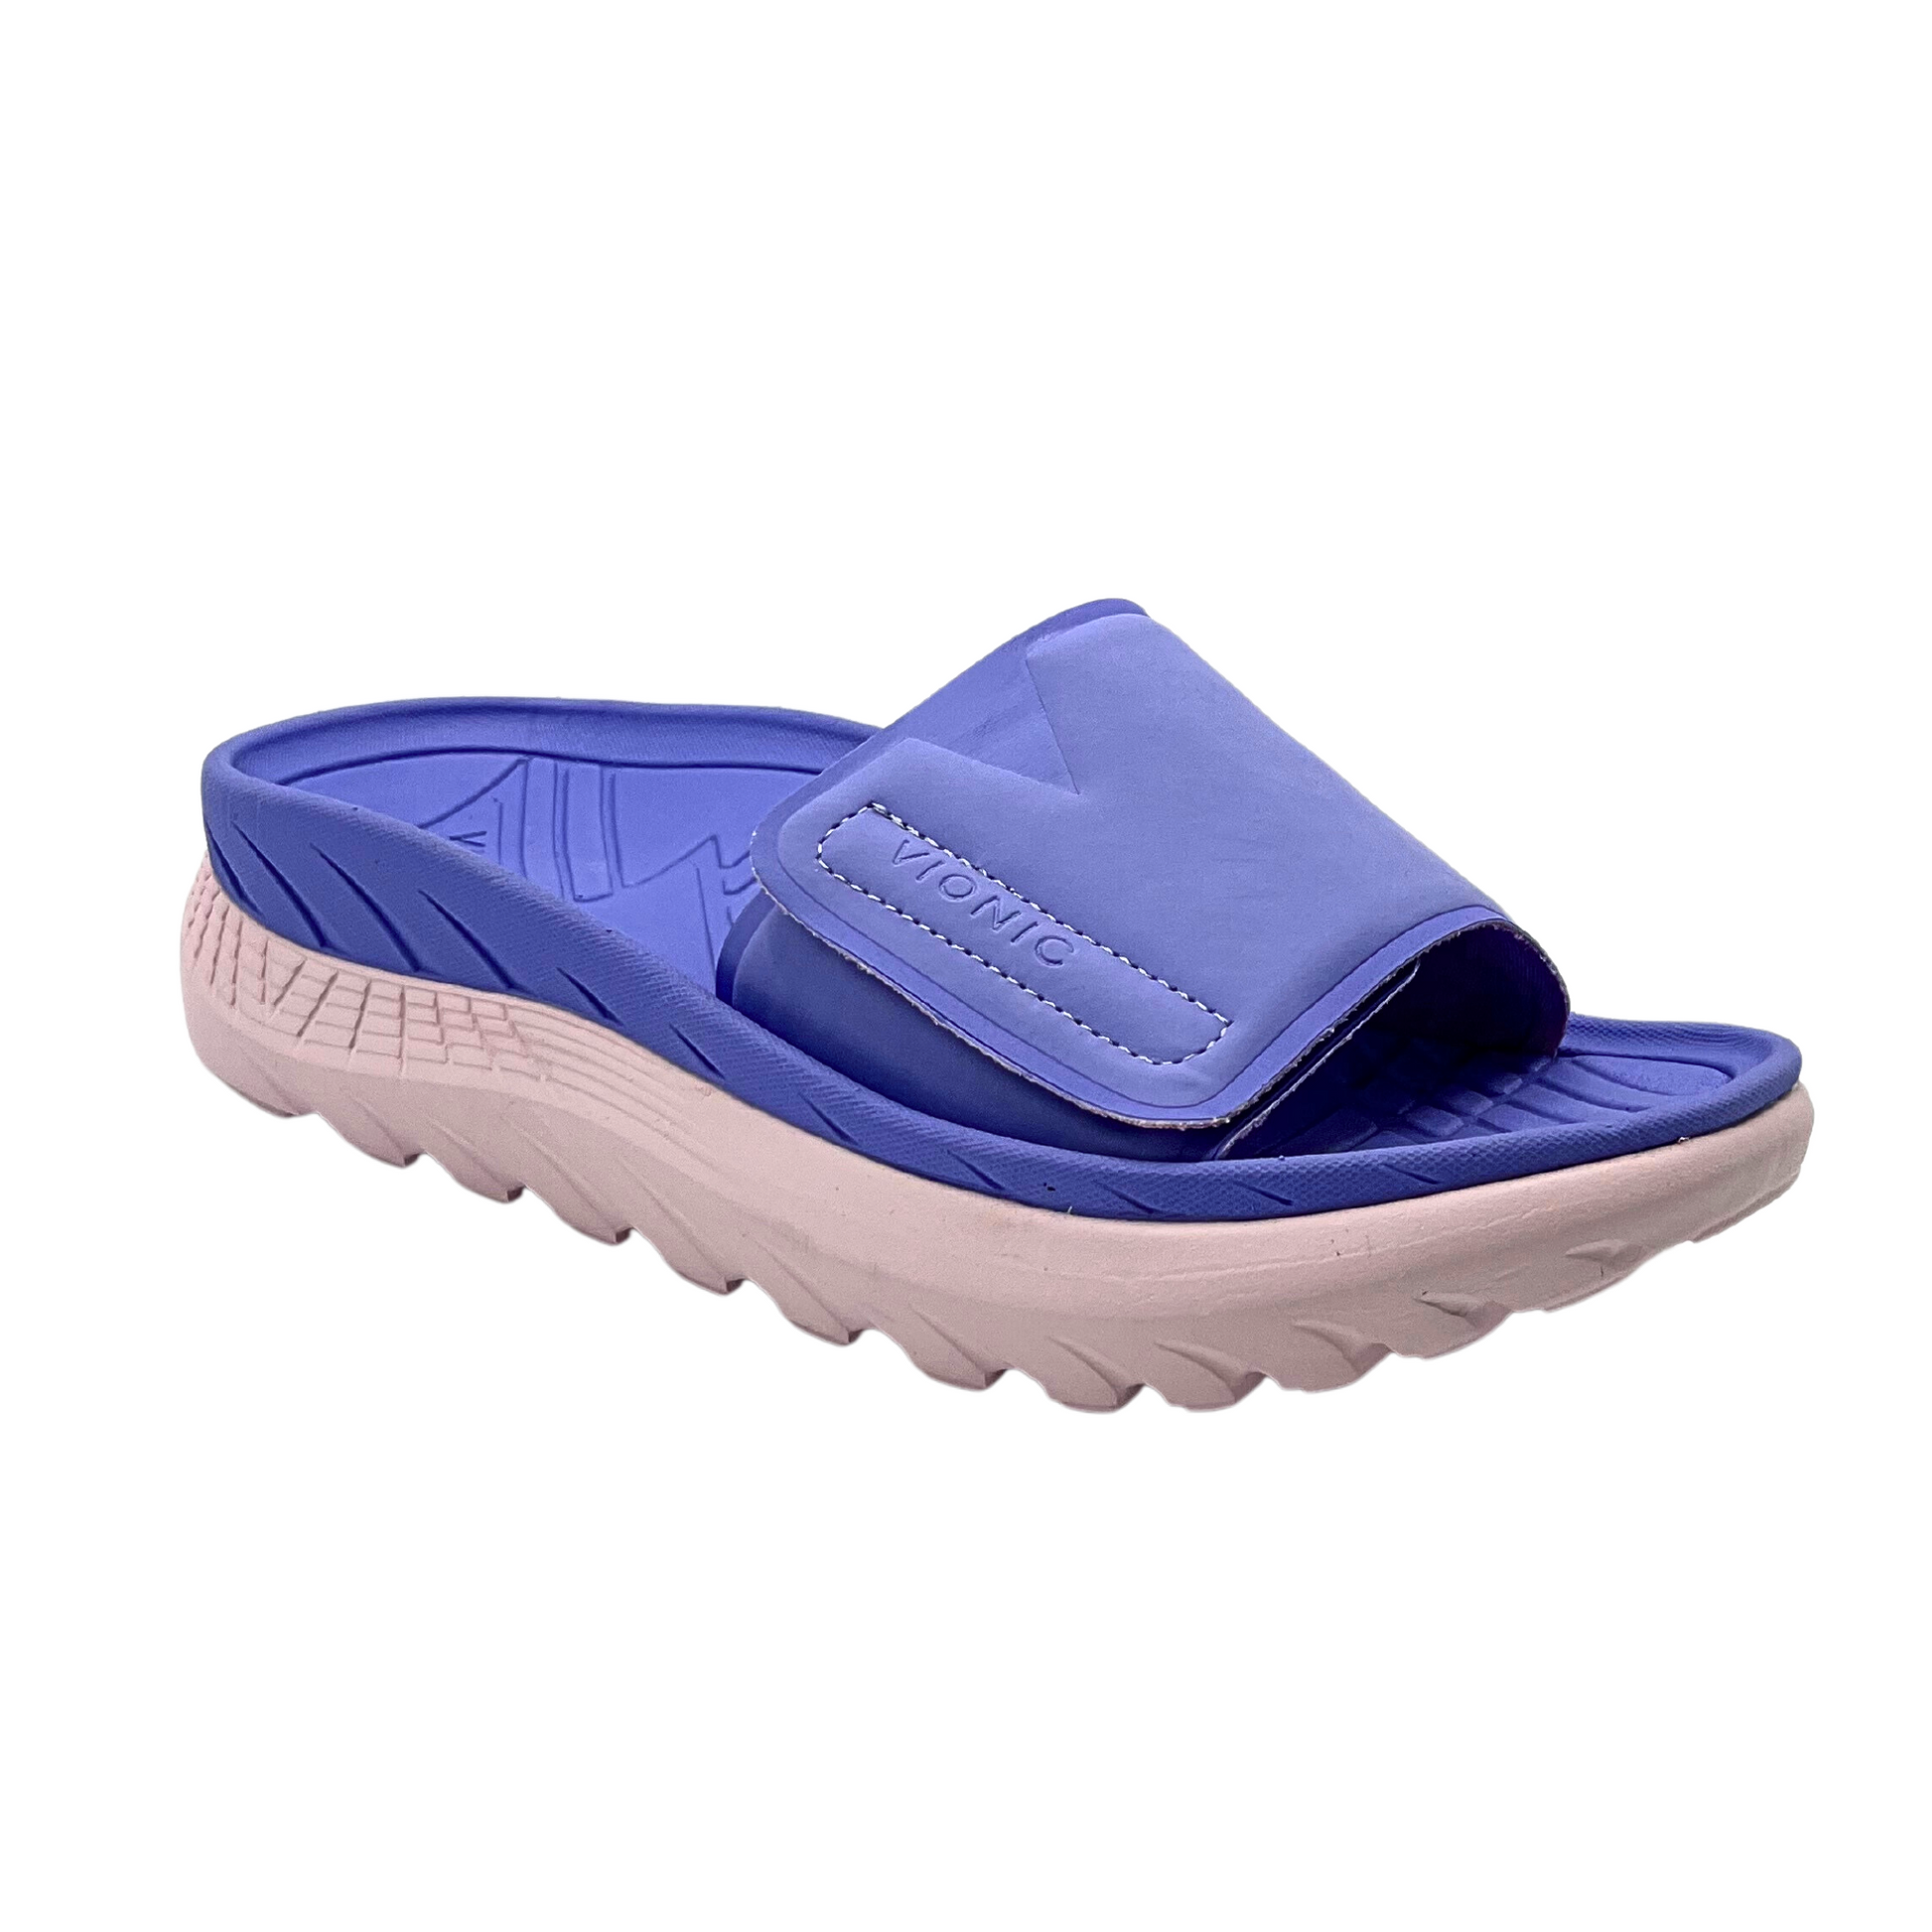 Angled side view of a fun beach slide.  Two-tone with a dark lilac on the top and a soft pink outsole.  One wide strap at front with a velcro adjustment